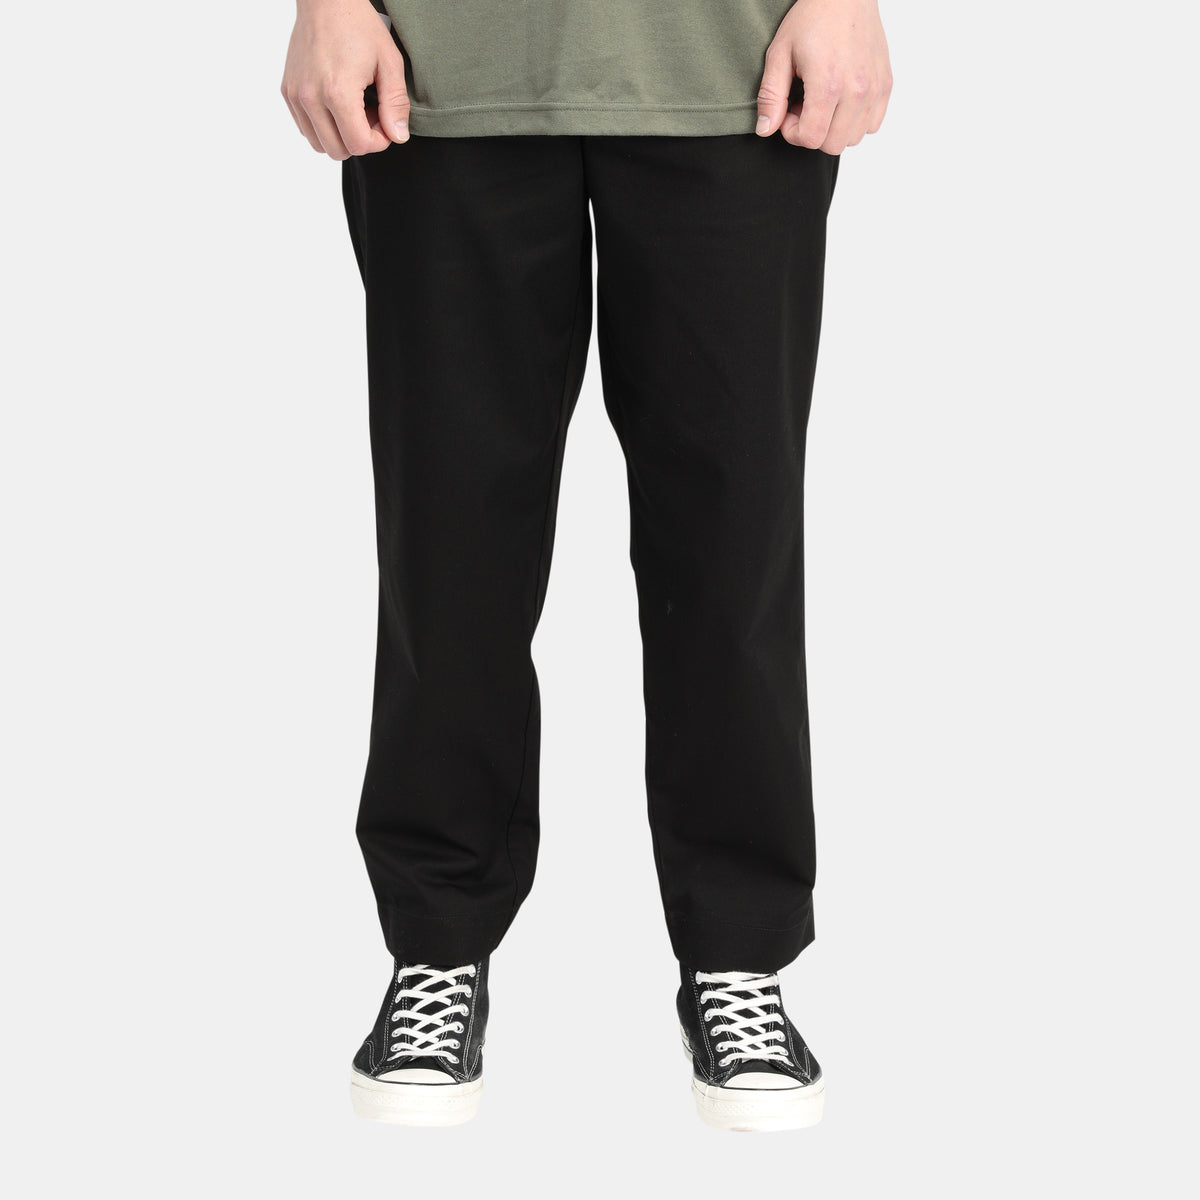 Looking for a WTAPS WRKT2001 Pant Black WTAPS to buy? Get it done now